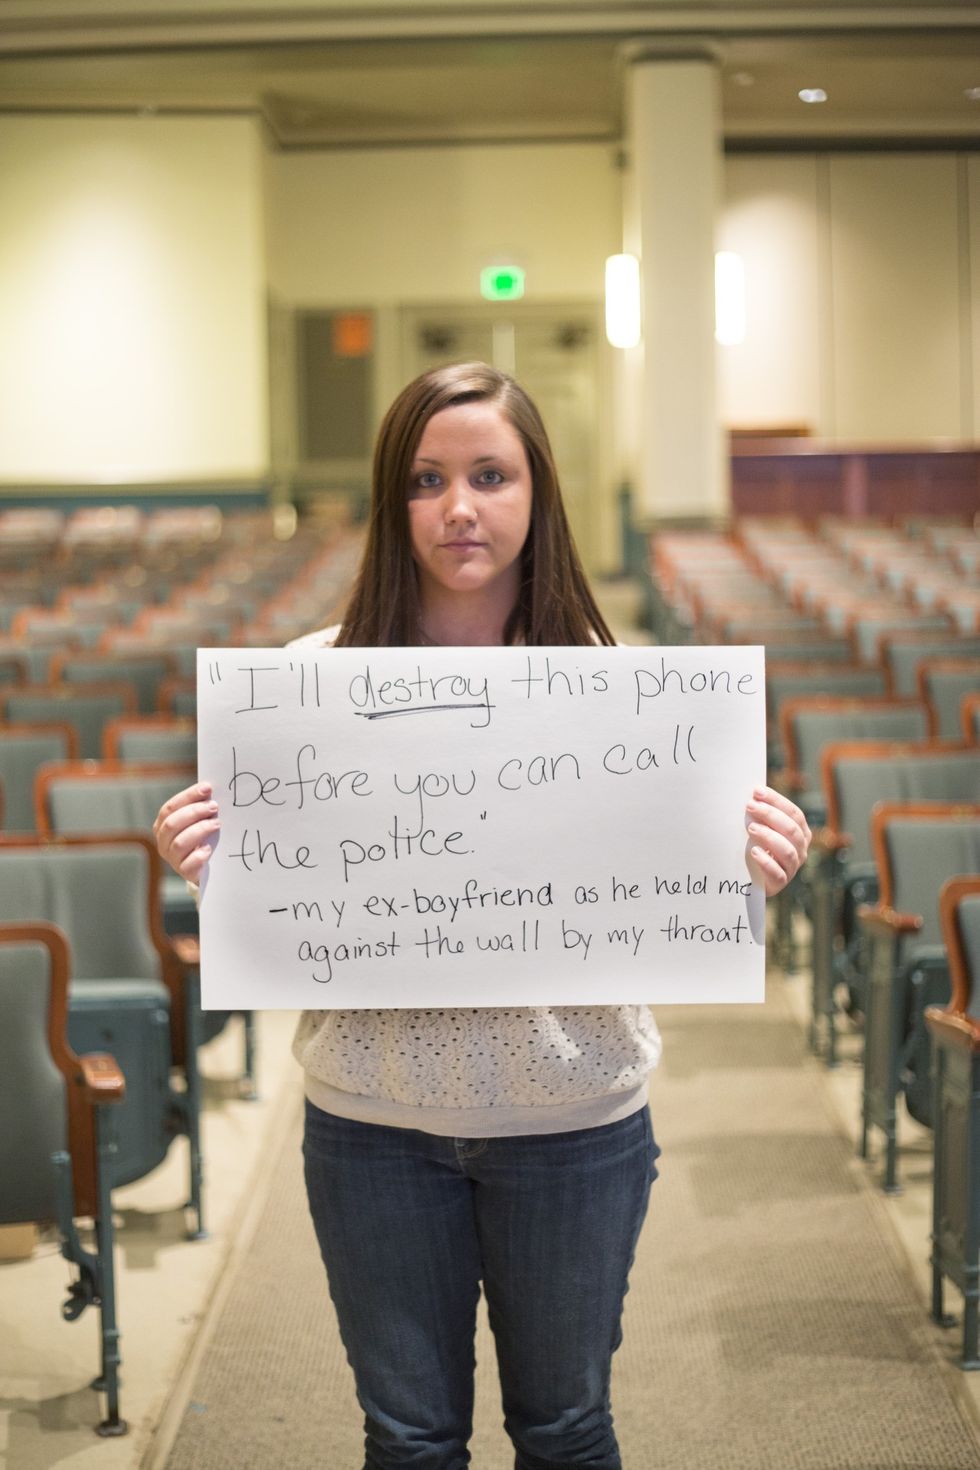 Brave women are photographed with signs quoting the terrifying words of their abusers